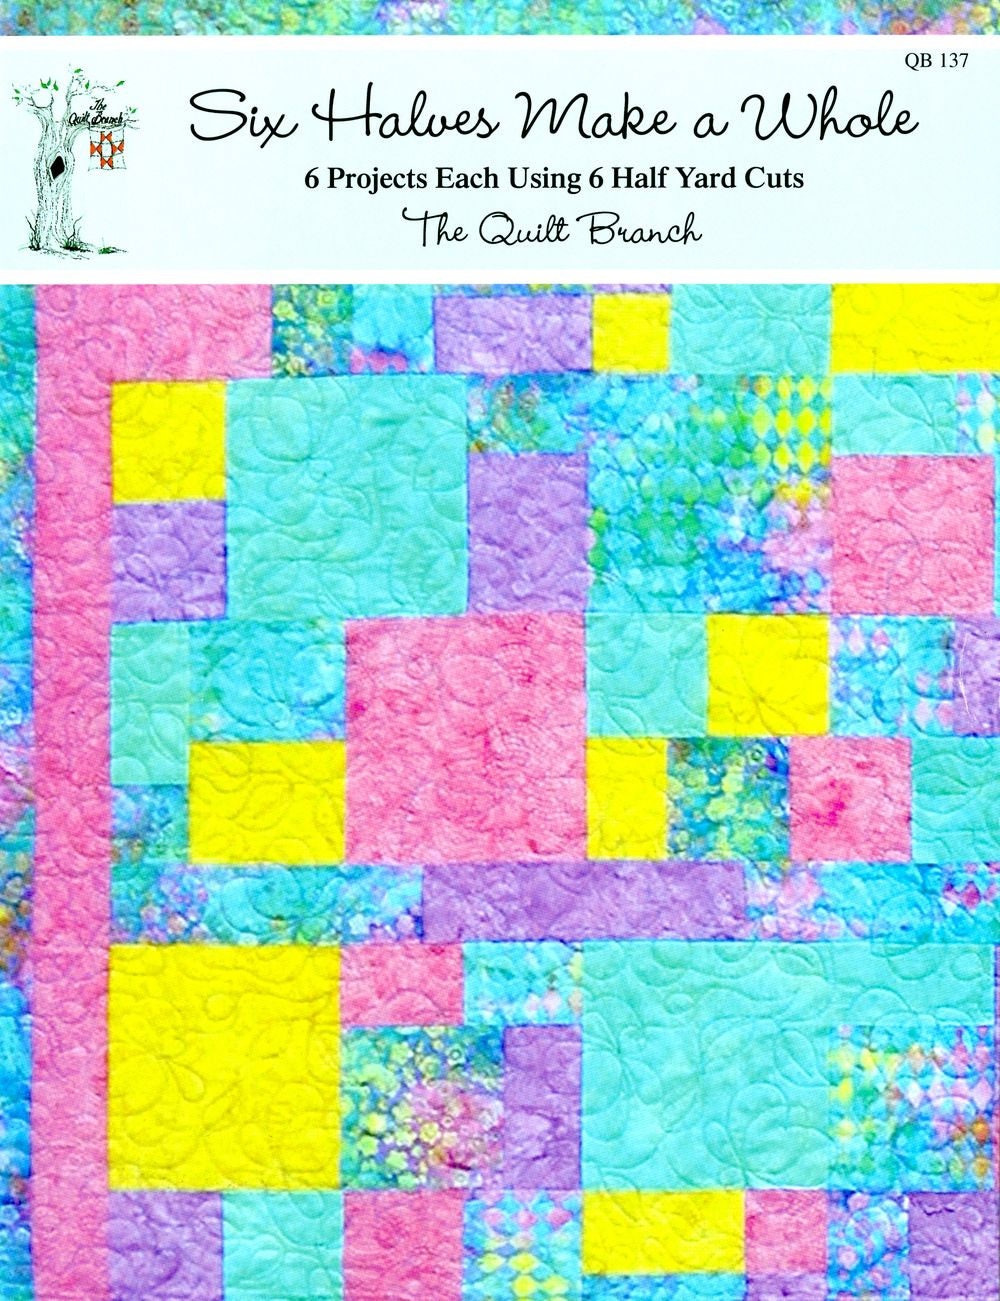 Six Halves Make A Whole Quilt Pattern Book by Susan Knapp of The Quilt Branch